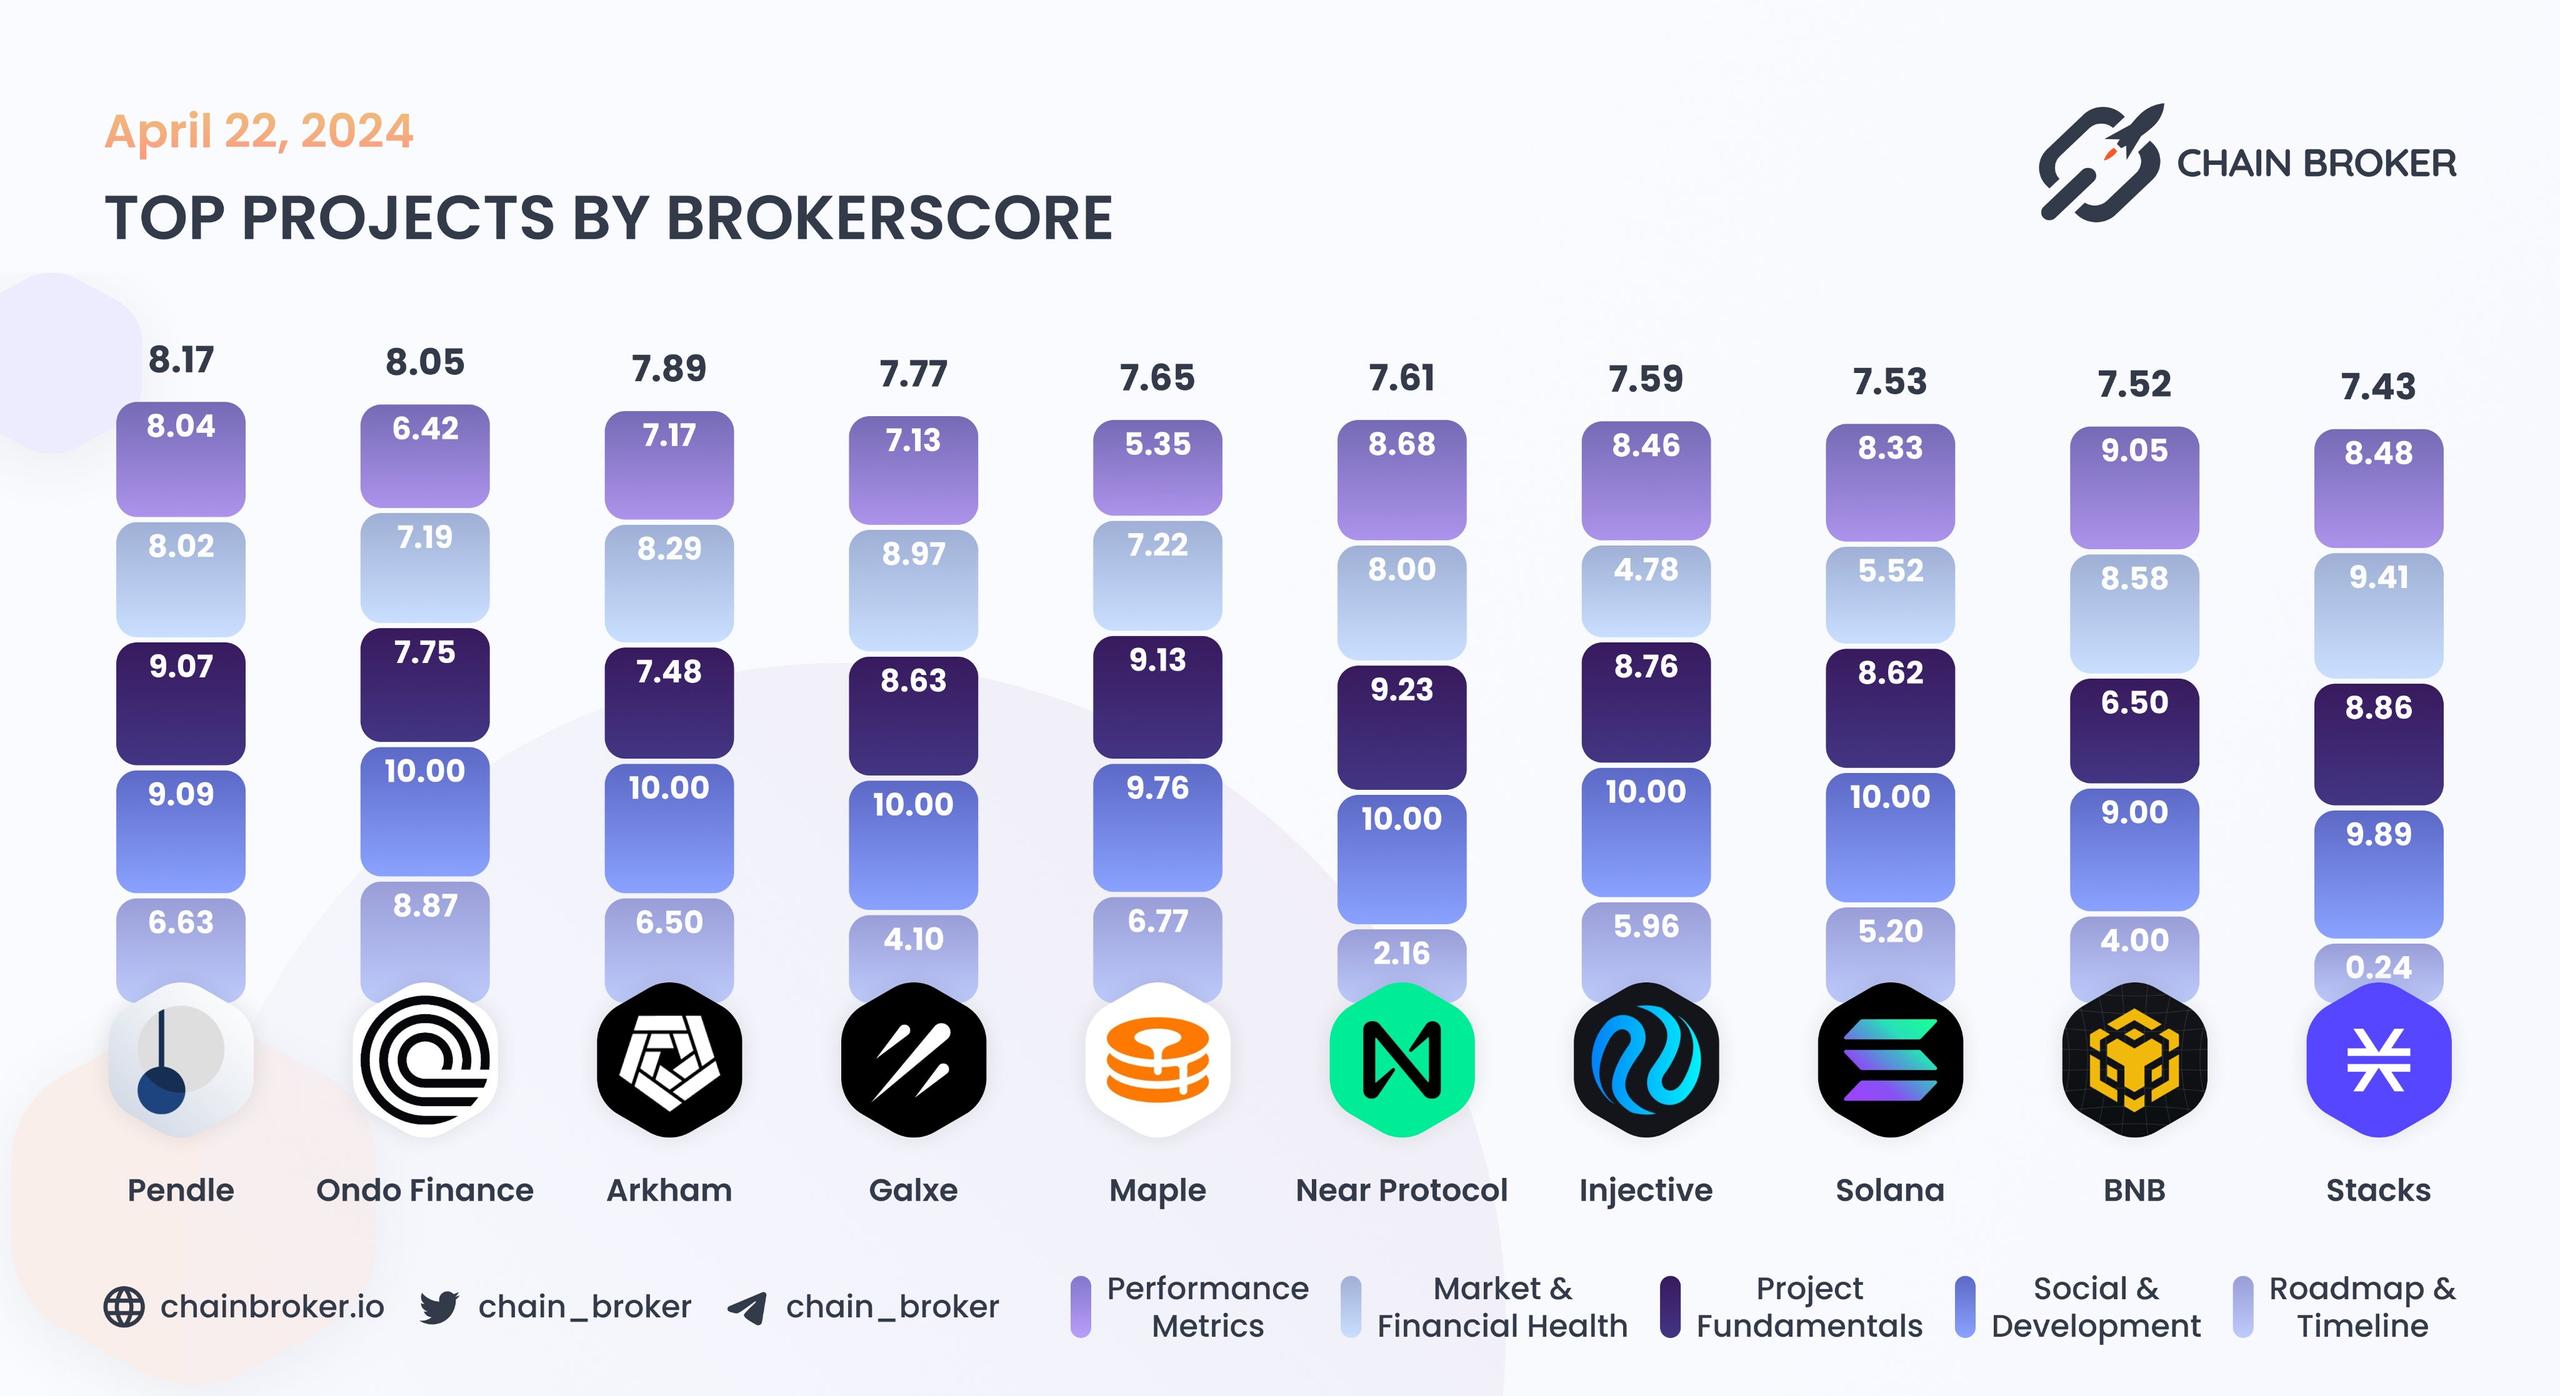 Top projects by BrokerScore